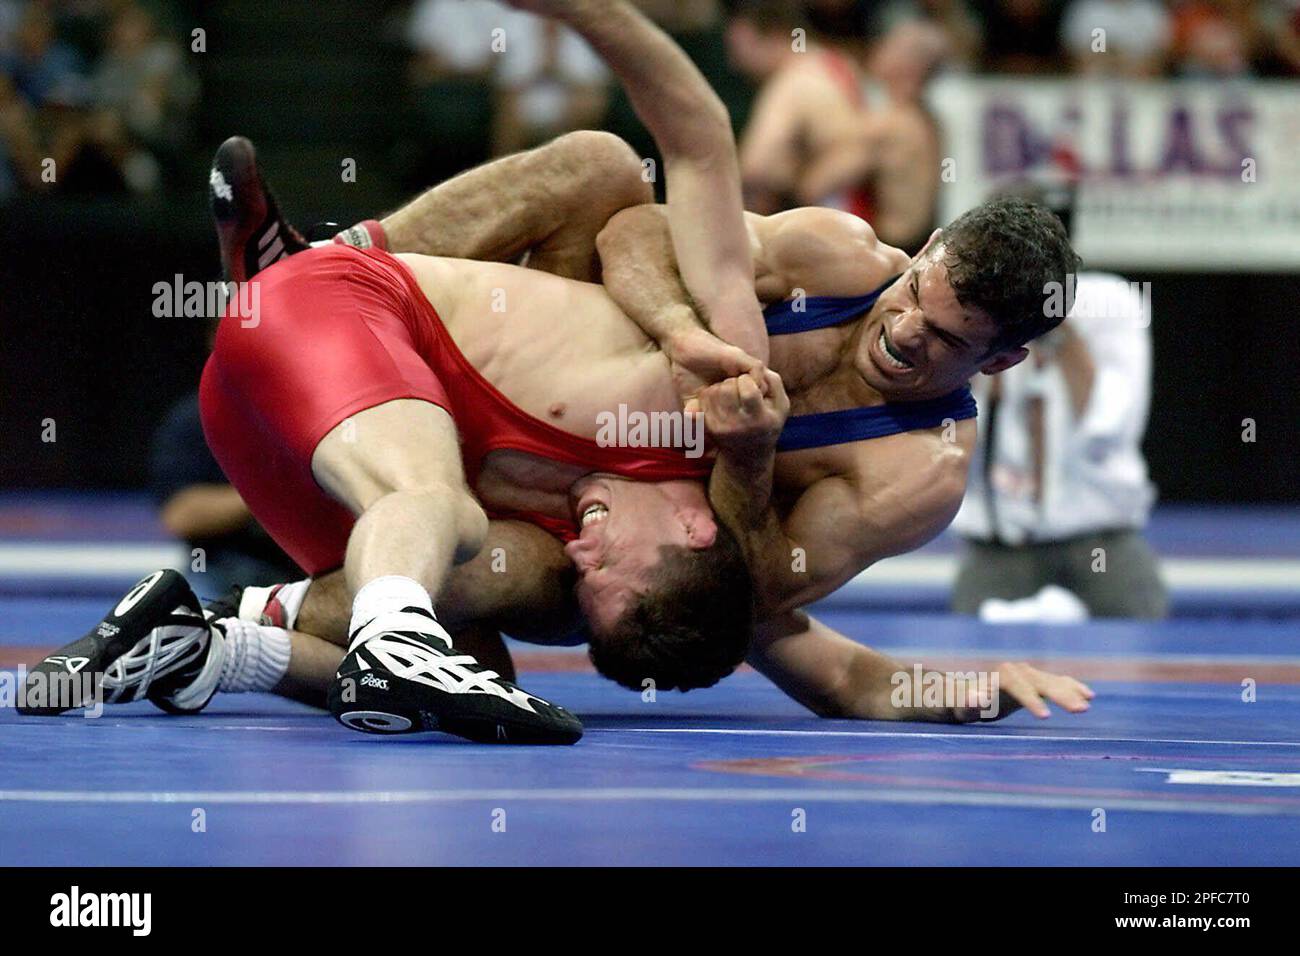 John Guira, right, from New York, tries to roll over Terry Steiner, from Madison, Wis., during their 69kg bout in freestyle wrestling during the U.S